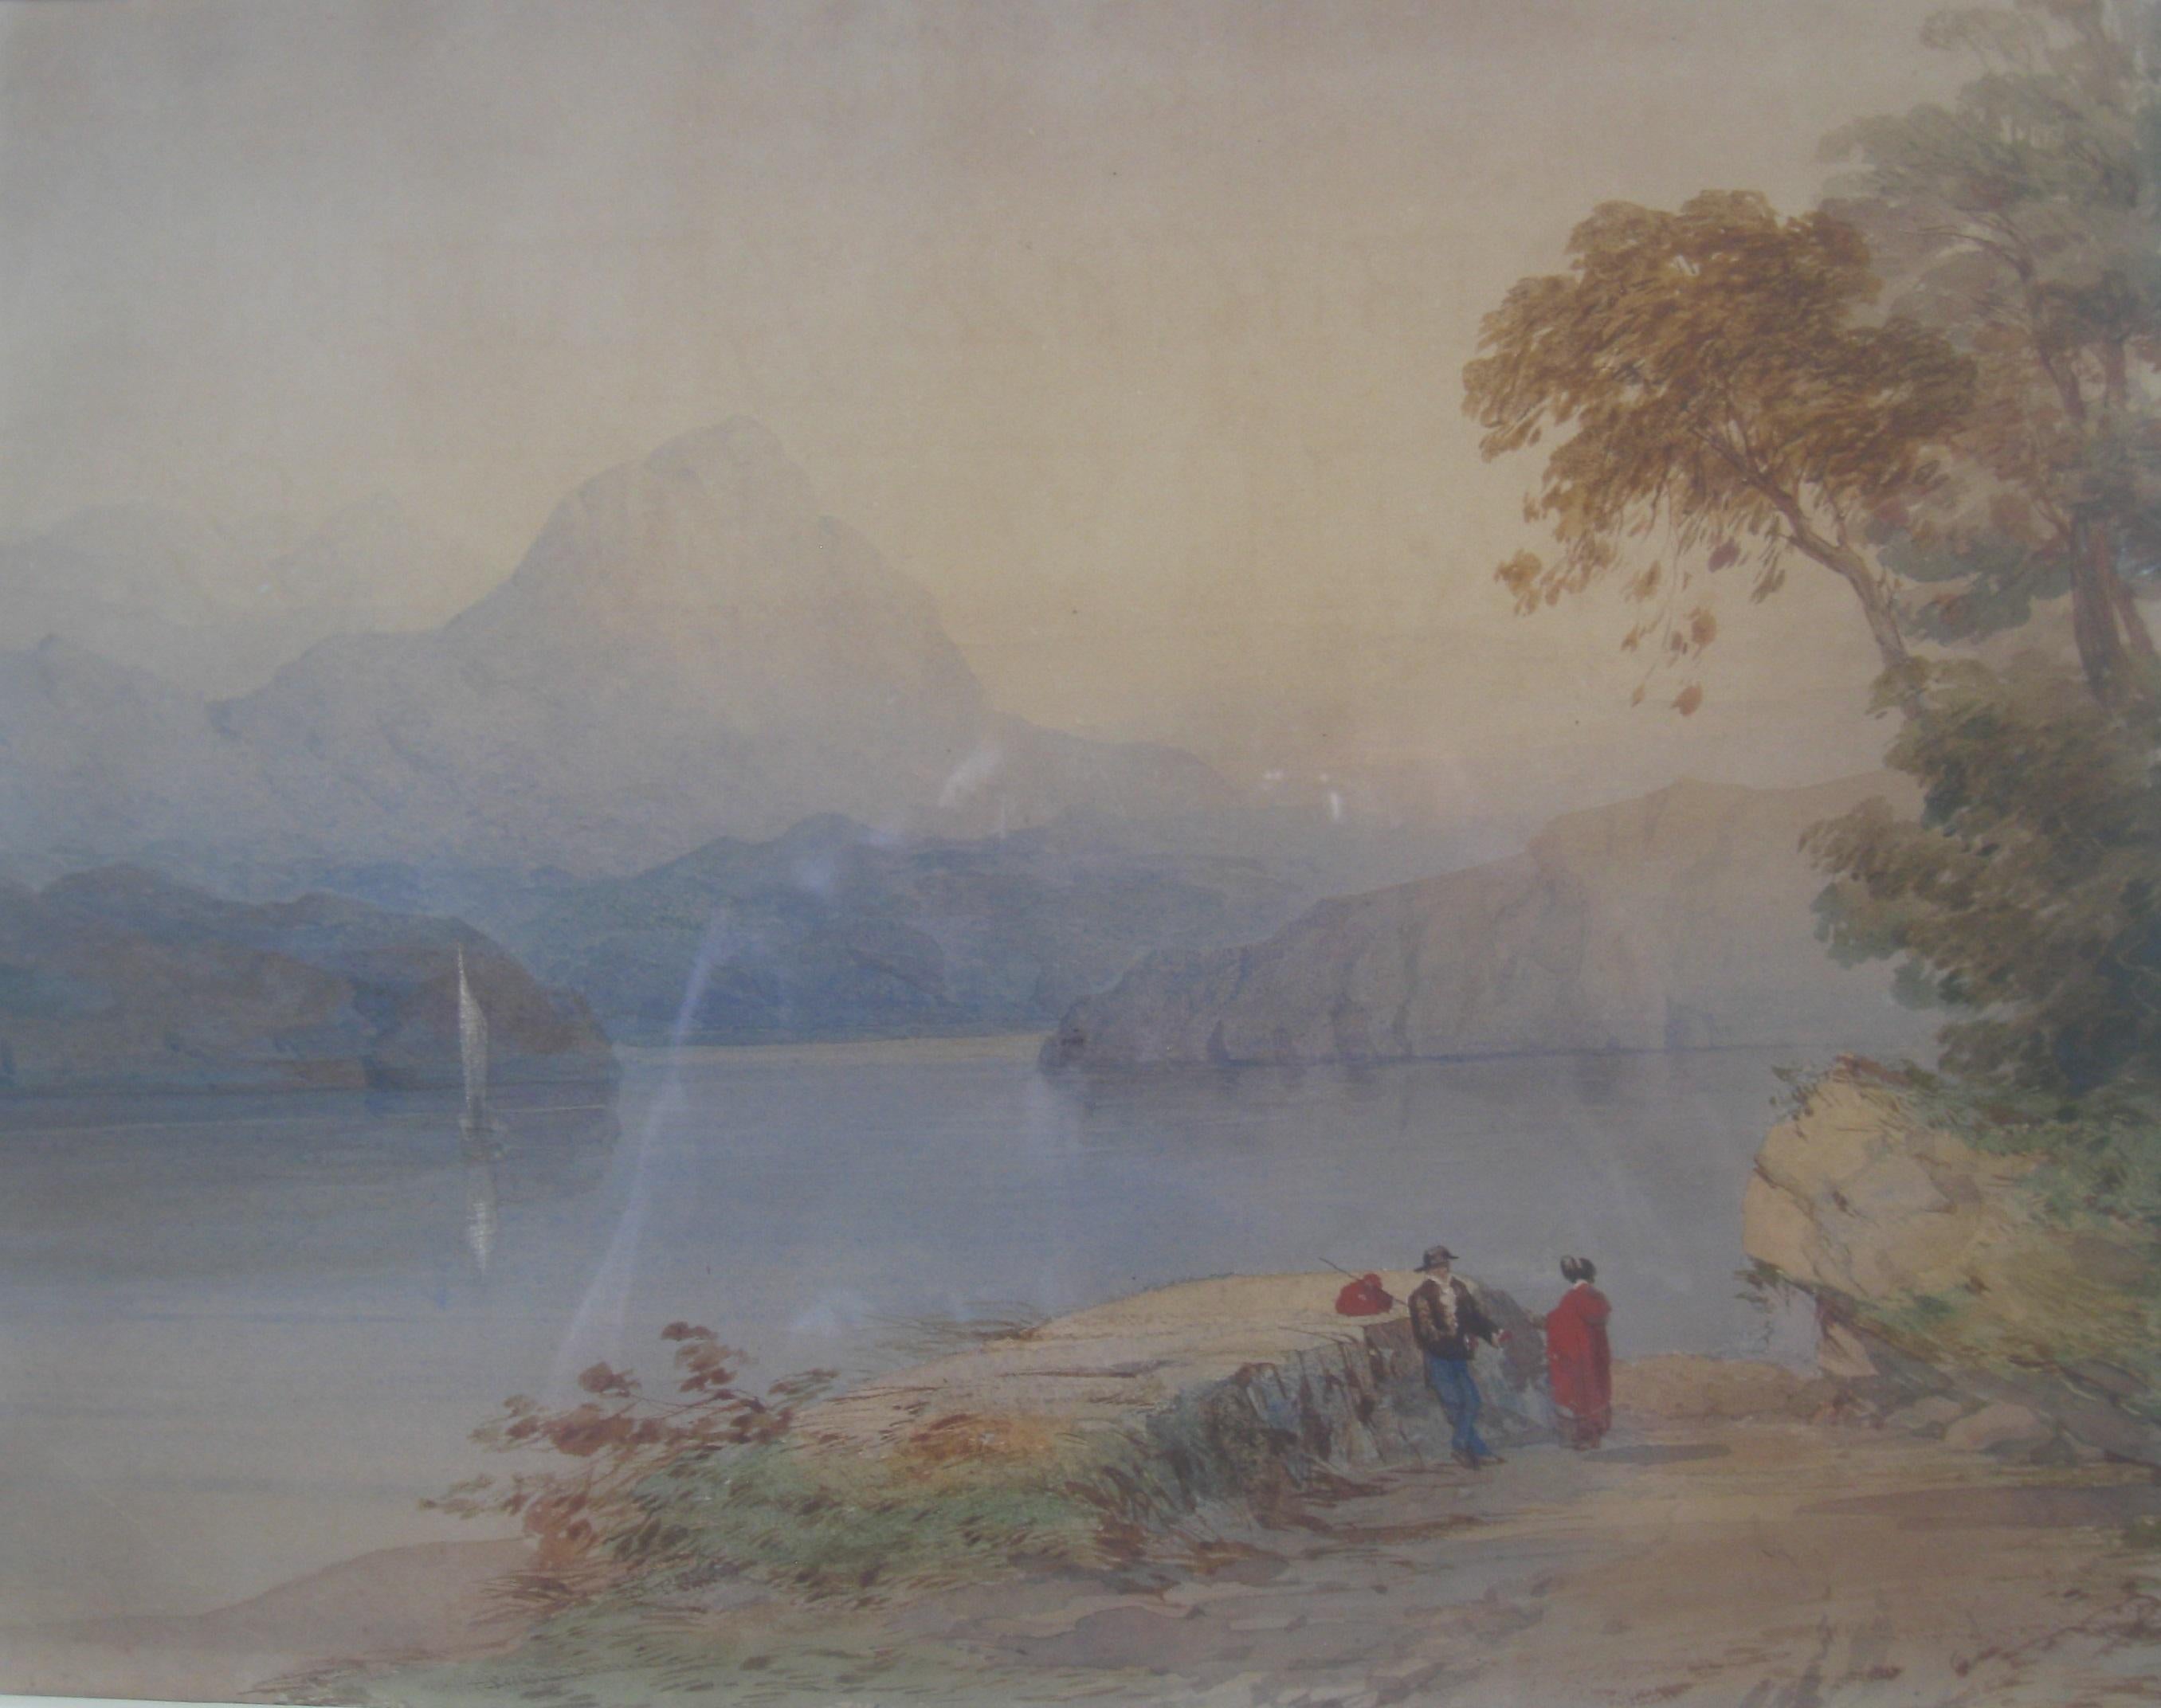 A fine watercolor by Thomas Miles Richardson senior, (1784-1848).  A view of a Swiss lake and Alps with the Matterhorn mountain. One of the fine English Watercolourists of the 19th century. His works are in many Museum collections. Housed in an